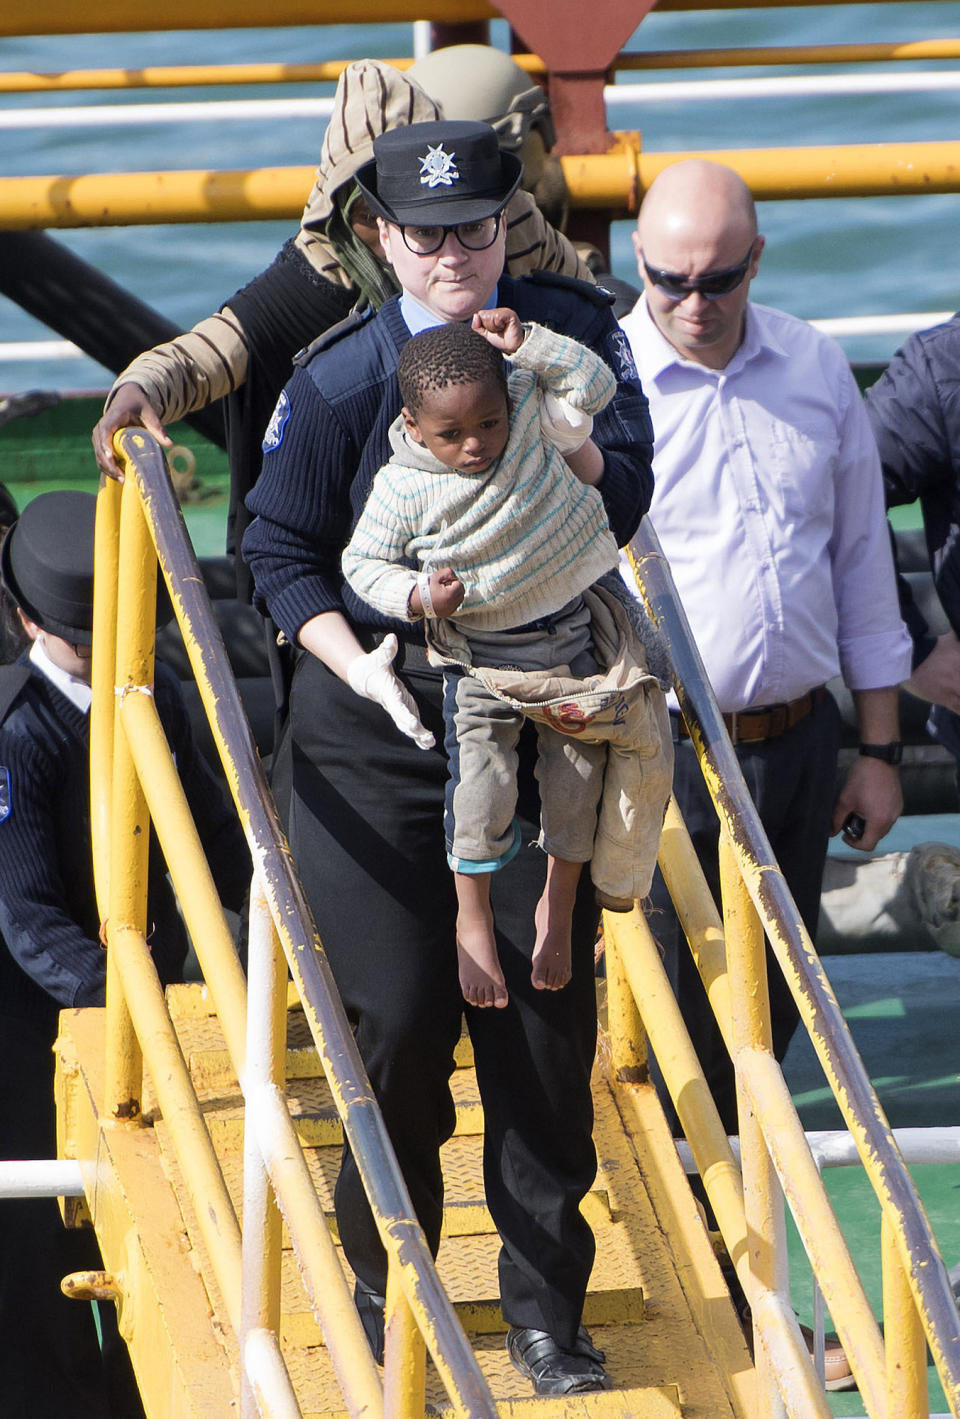 Migrants are disembarked from Turkish oil tanker El Hiblu 1, which was hijacked by migrants, in Valletta, Malta, Thursday March 28, 2019. A Maltese special operations team on Thursday boarded a tanker that had been hijacked by migrants rescued at sea, and returned control to the captain, before escorting it to a Maltese port. (AP Photo/Rene' Rossignaud)